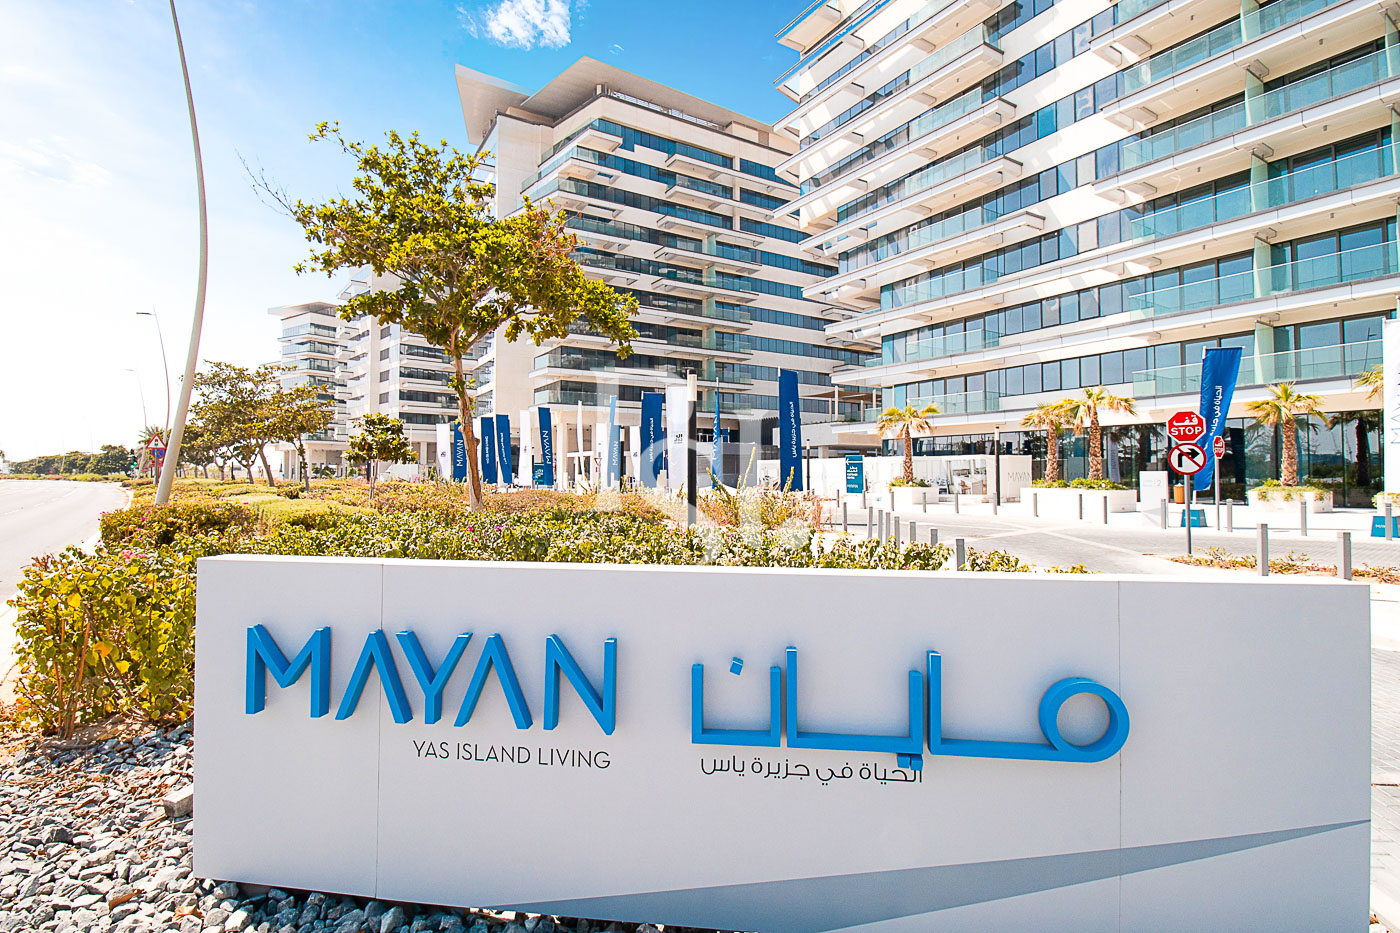 Own a property in a luxurious community in Mayan, Yas Island.